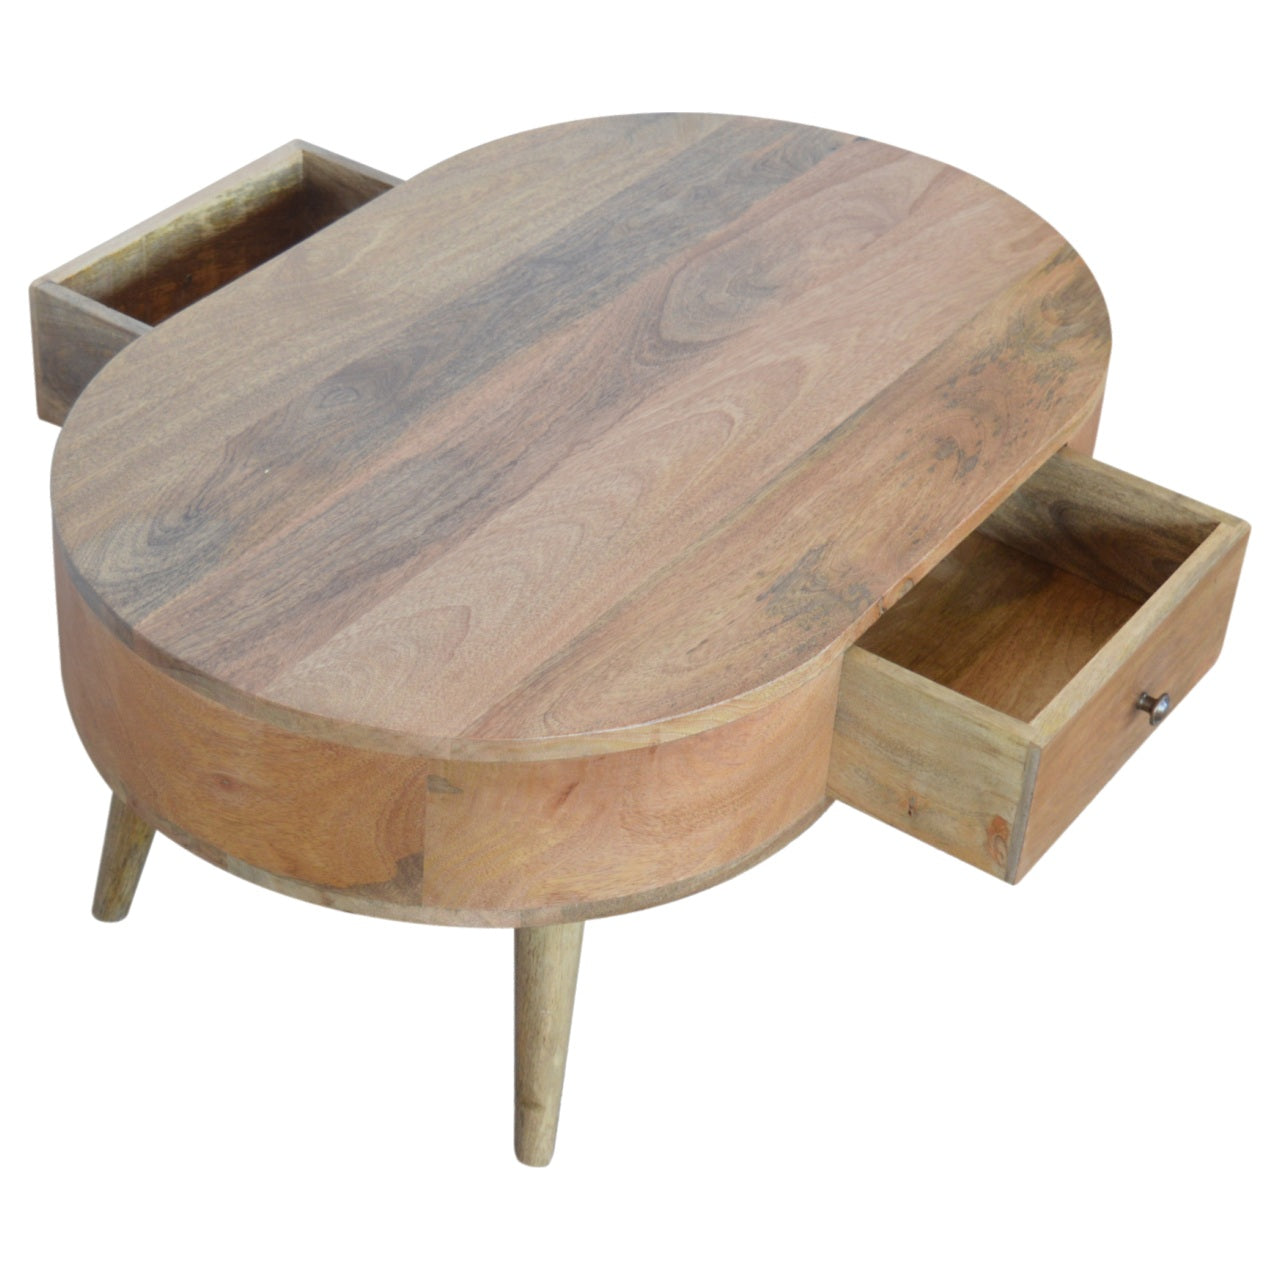 Parker Coffee Table, Timeless Rounded Solid Oak - Broxle